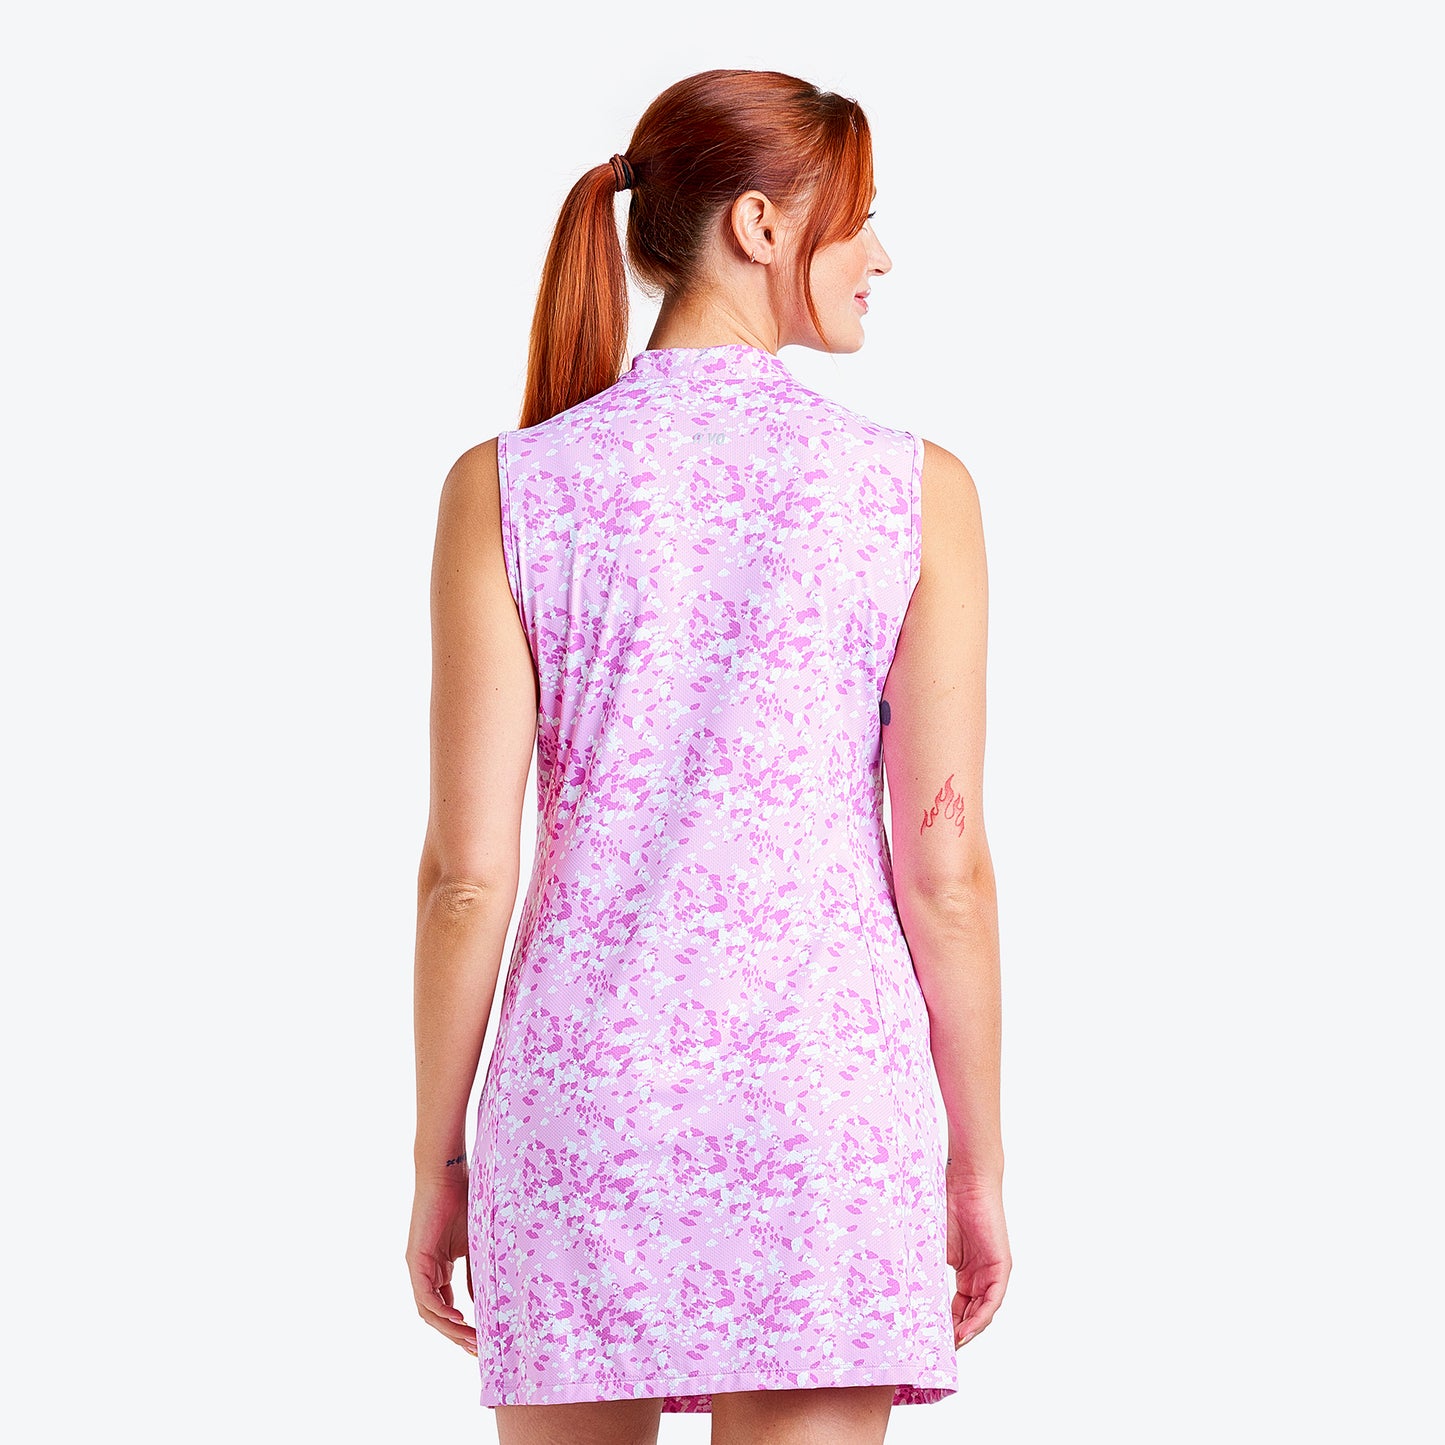 Nivo Ladies Sleeveless Liv-Cool Dress in Bubble Gum with Abstract Floral Print